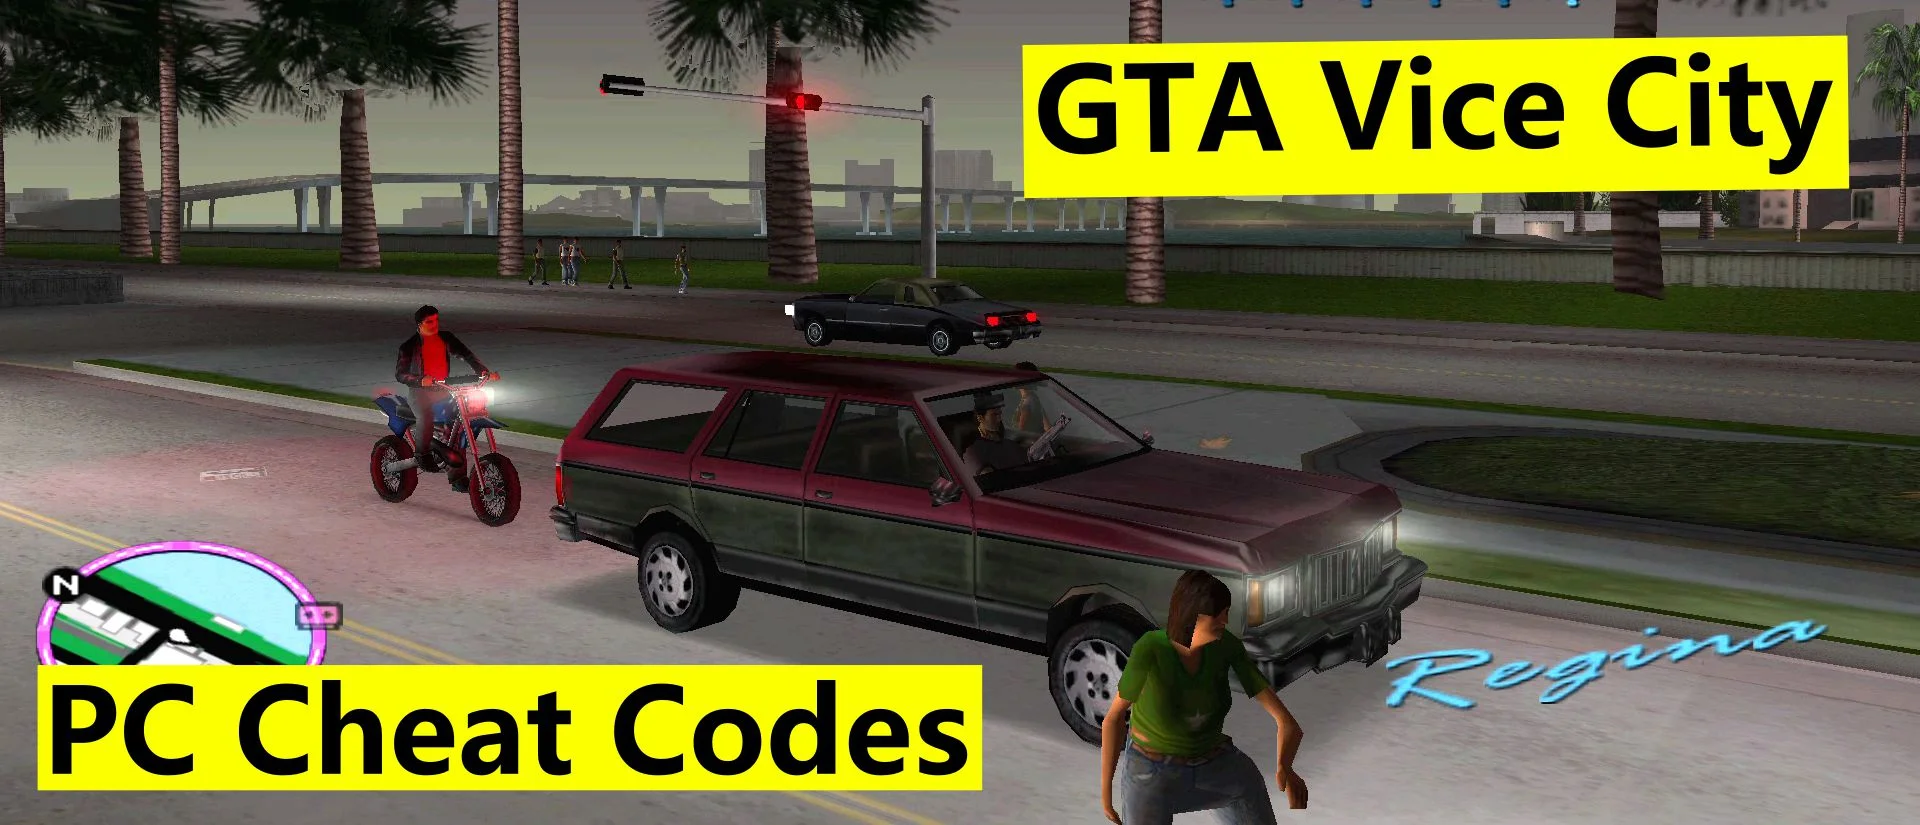 Gta Vice City Cheat Codes For Pc List Of All Cheats 